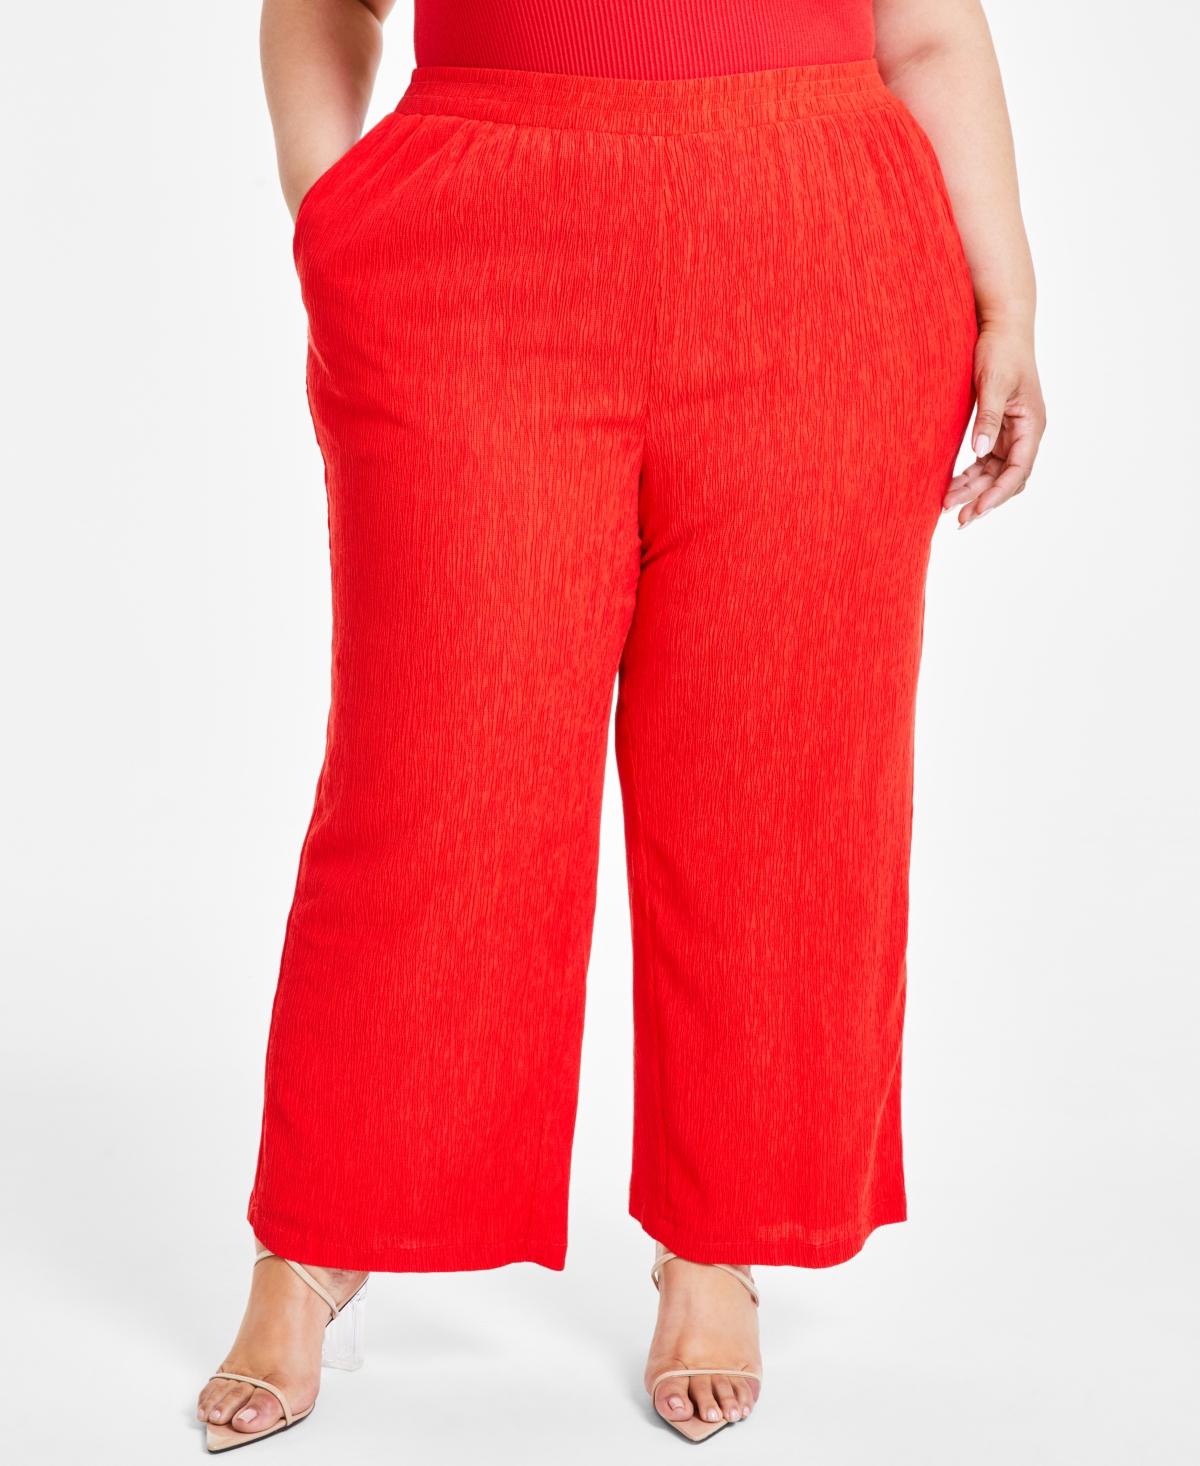 Trendy Plus Size Textured Pull-On Pants - Flame Scar